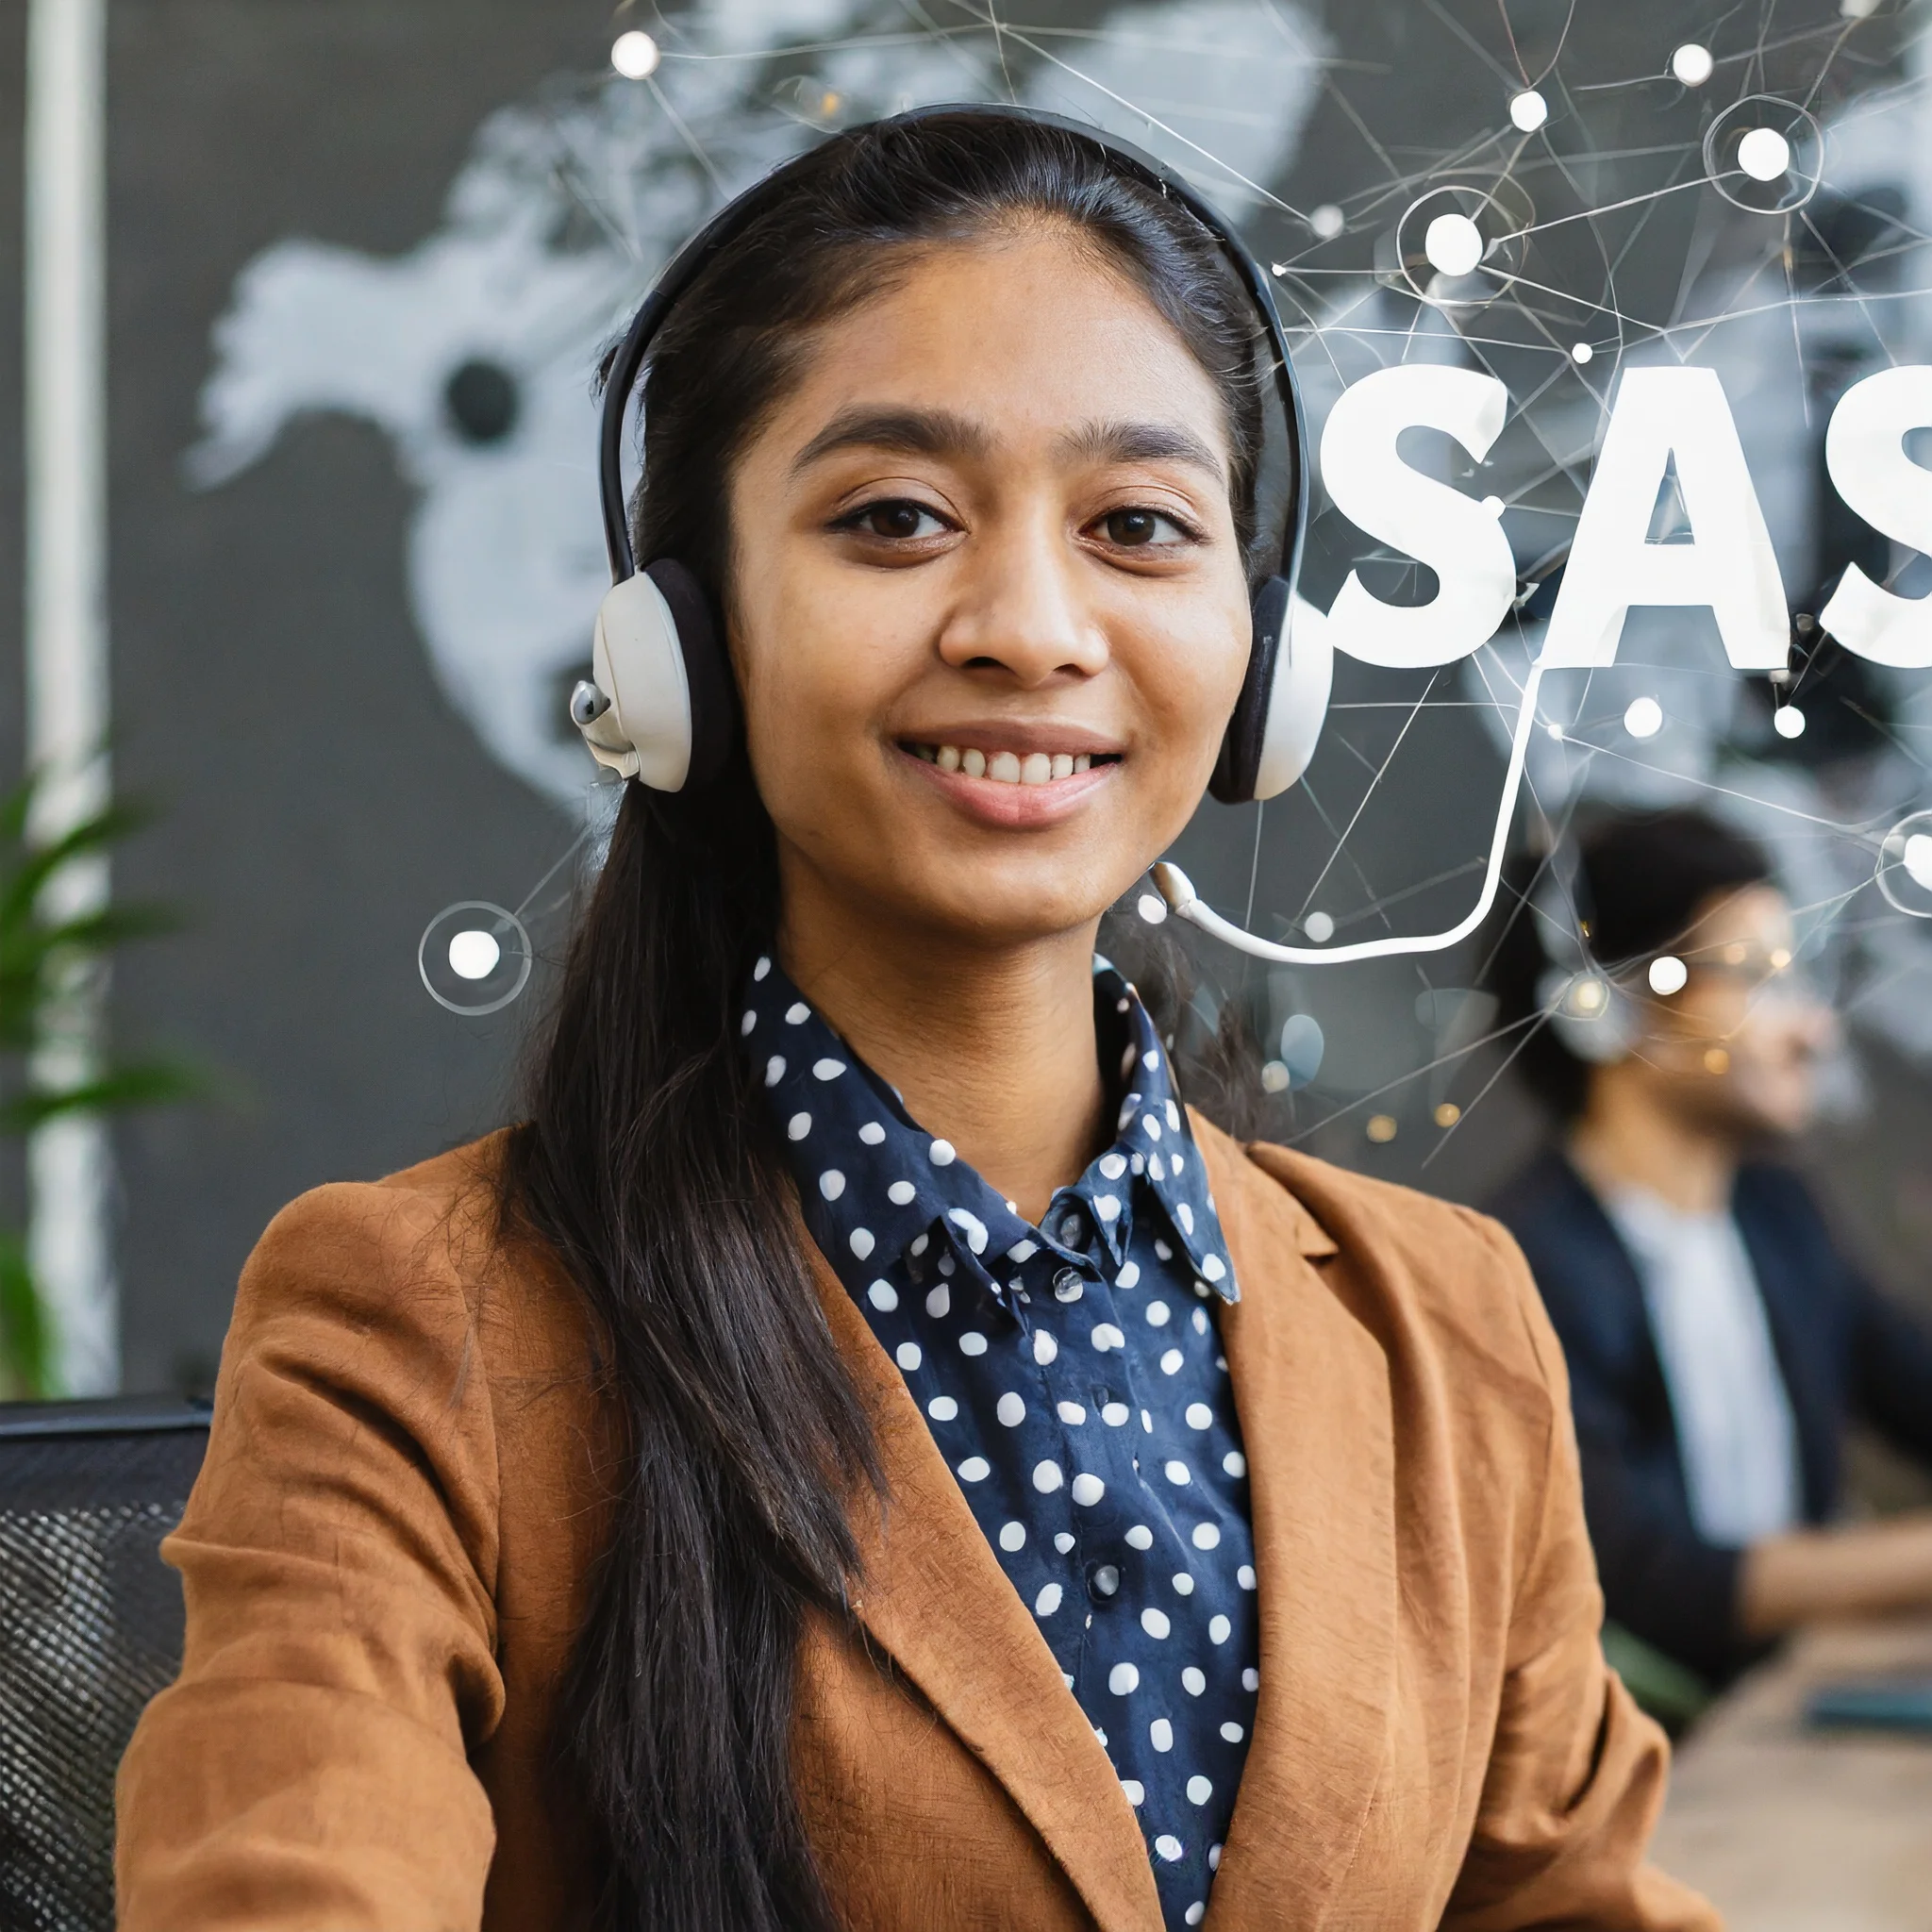 Why is customer support vital for a SAAS company?